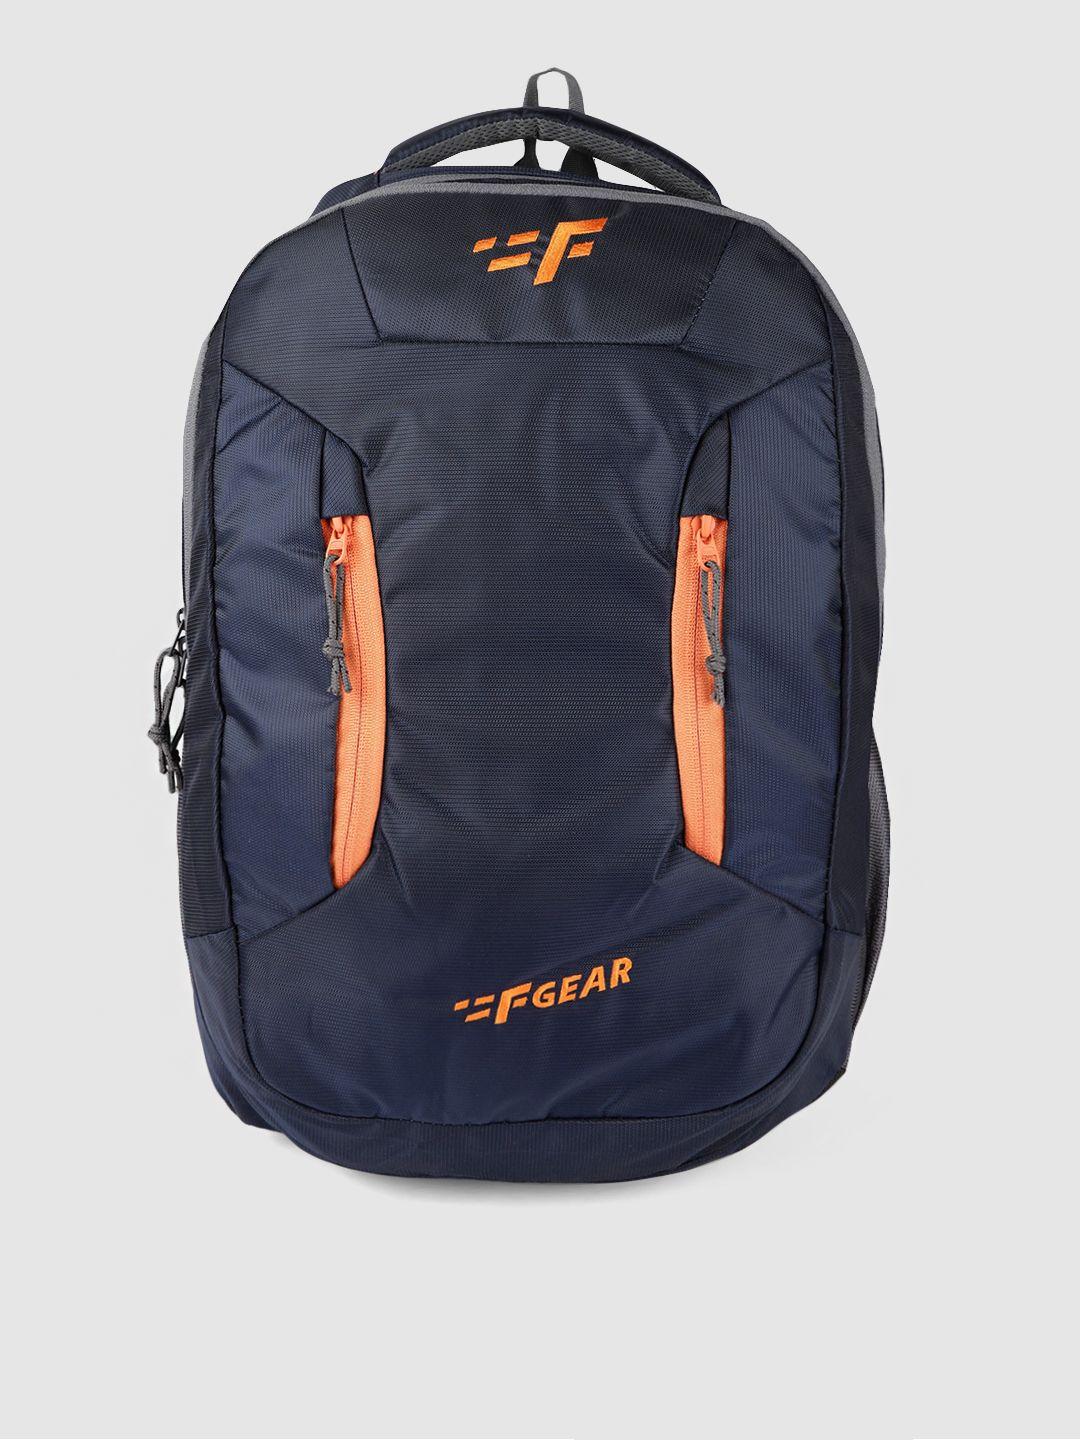 f gear unisex navy blue solid amigo doby laptop backpack